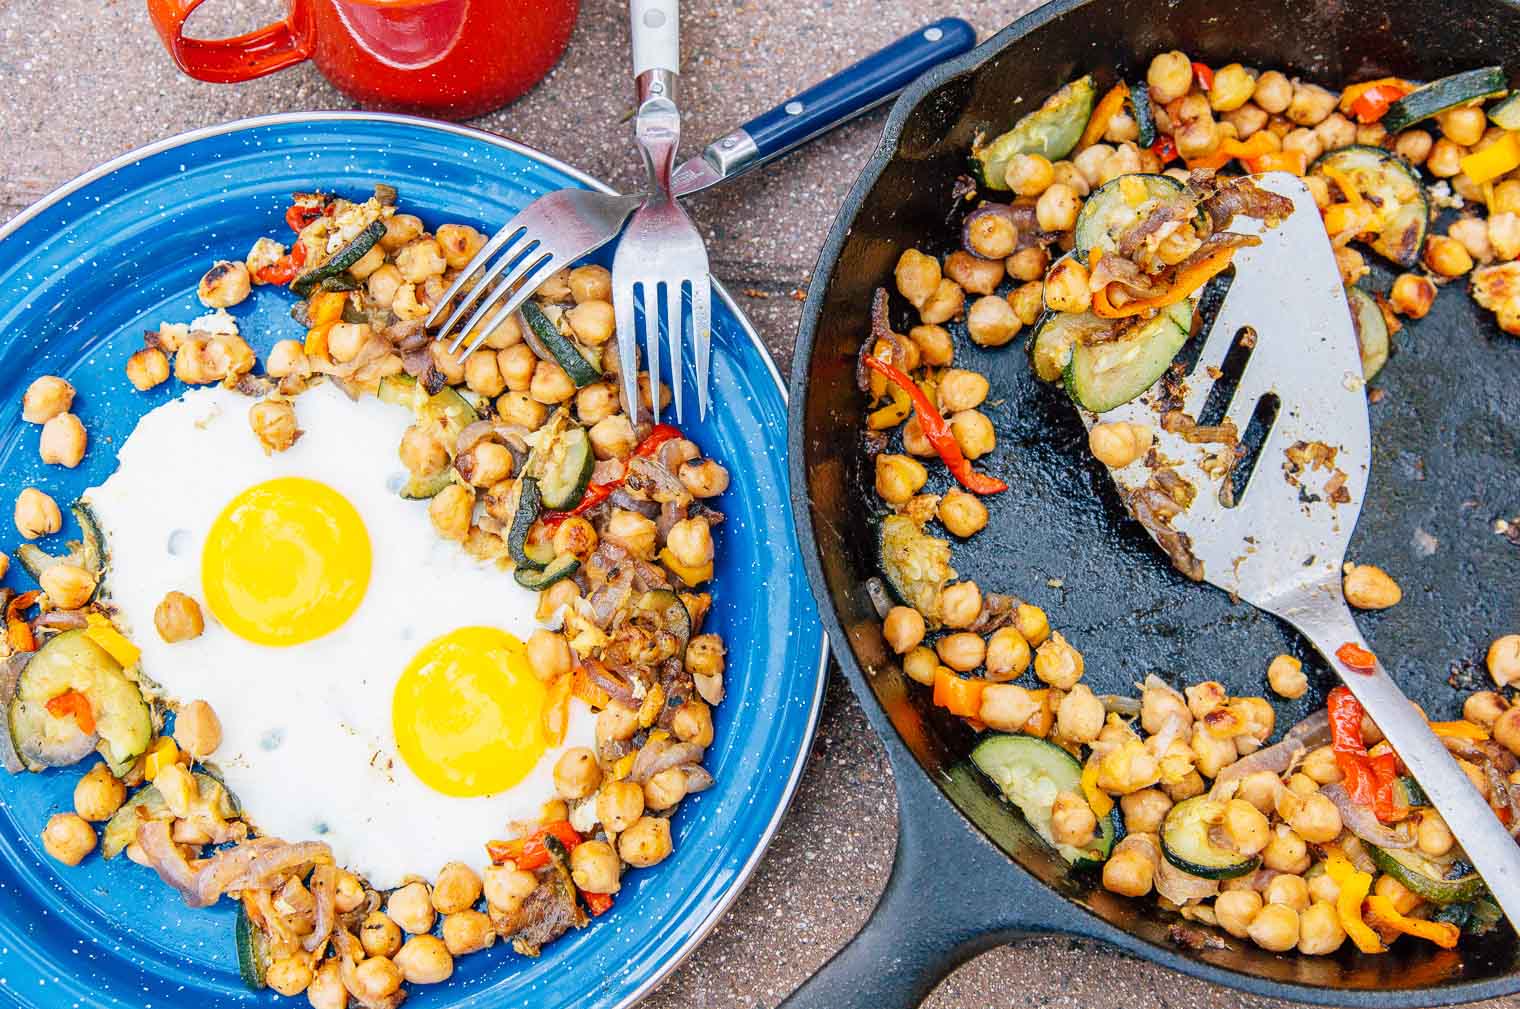 A cast iron skillet with chickpeas, vegetables, and two sunny side up eggs